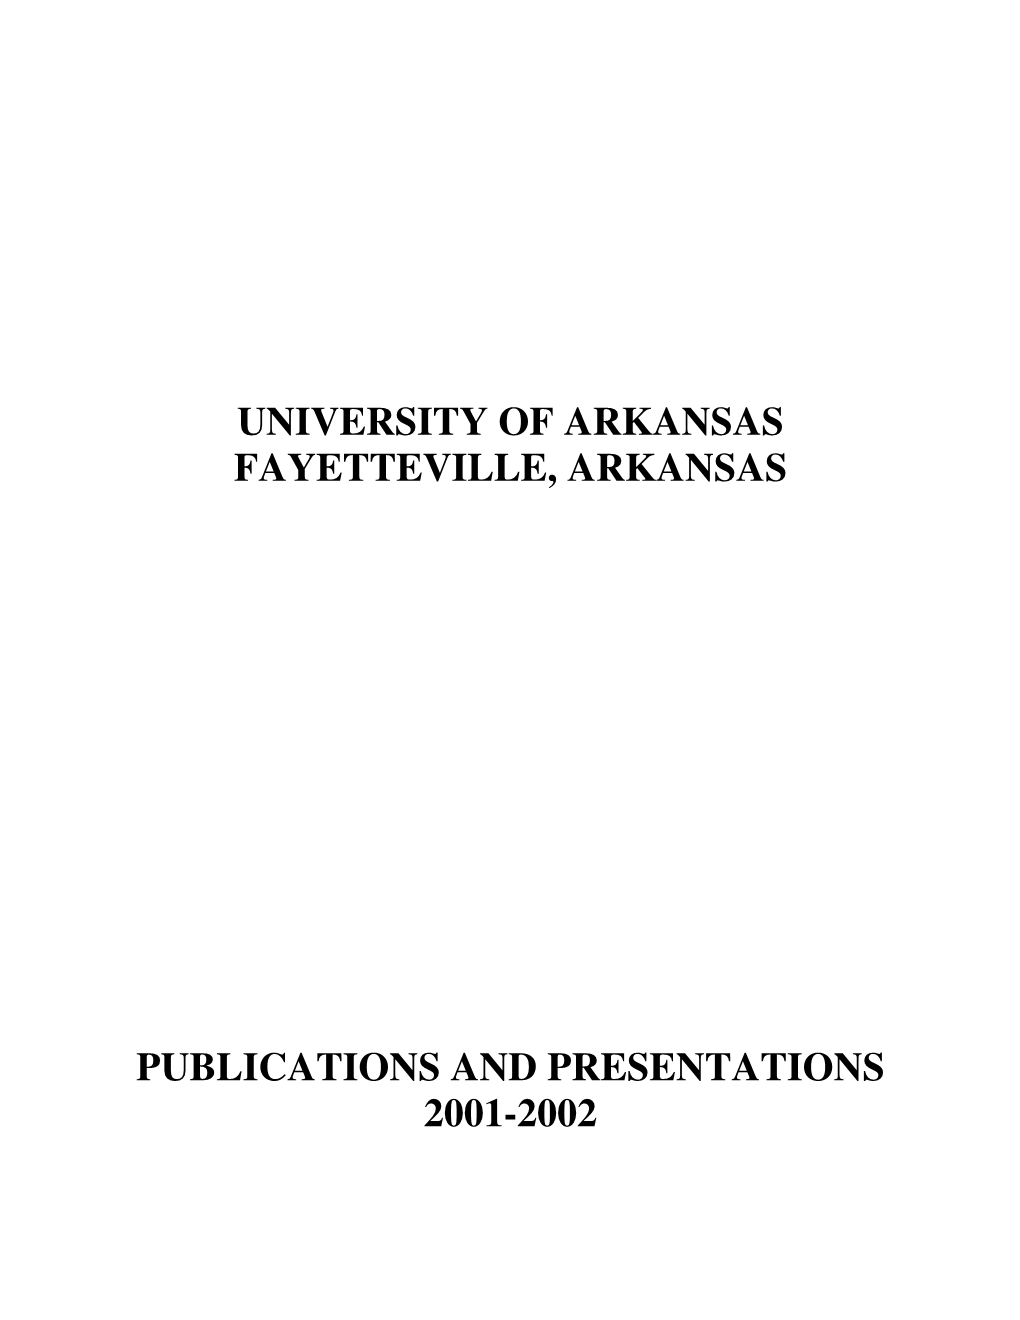 Publications and Presentations 2001-2002